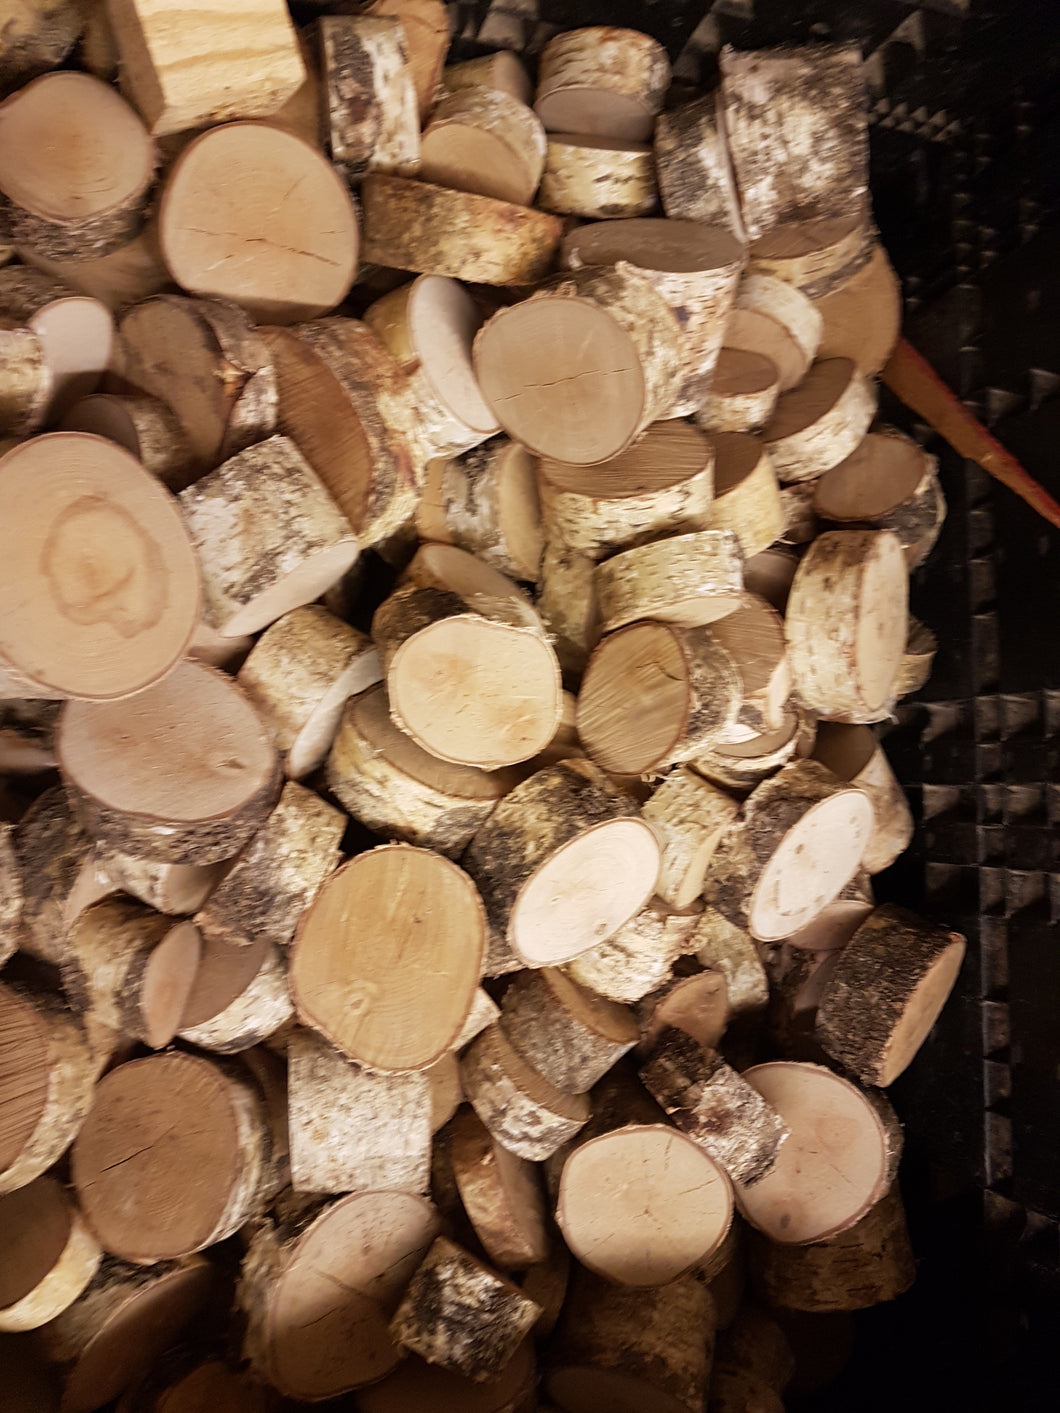 Large Net Bag of Round Log Offcuts - Kiln Dried Birch - Great for various arts and crafts